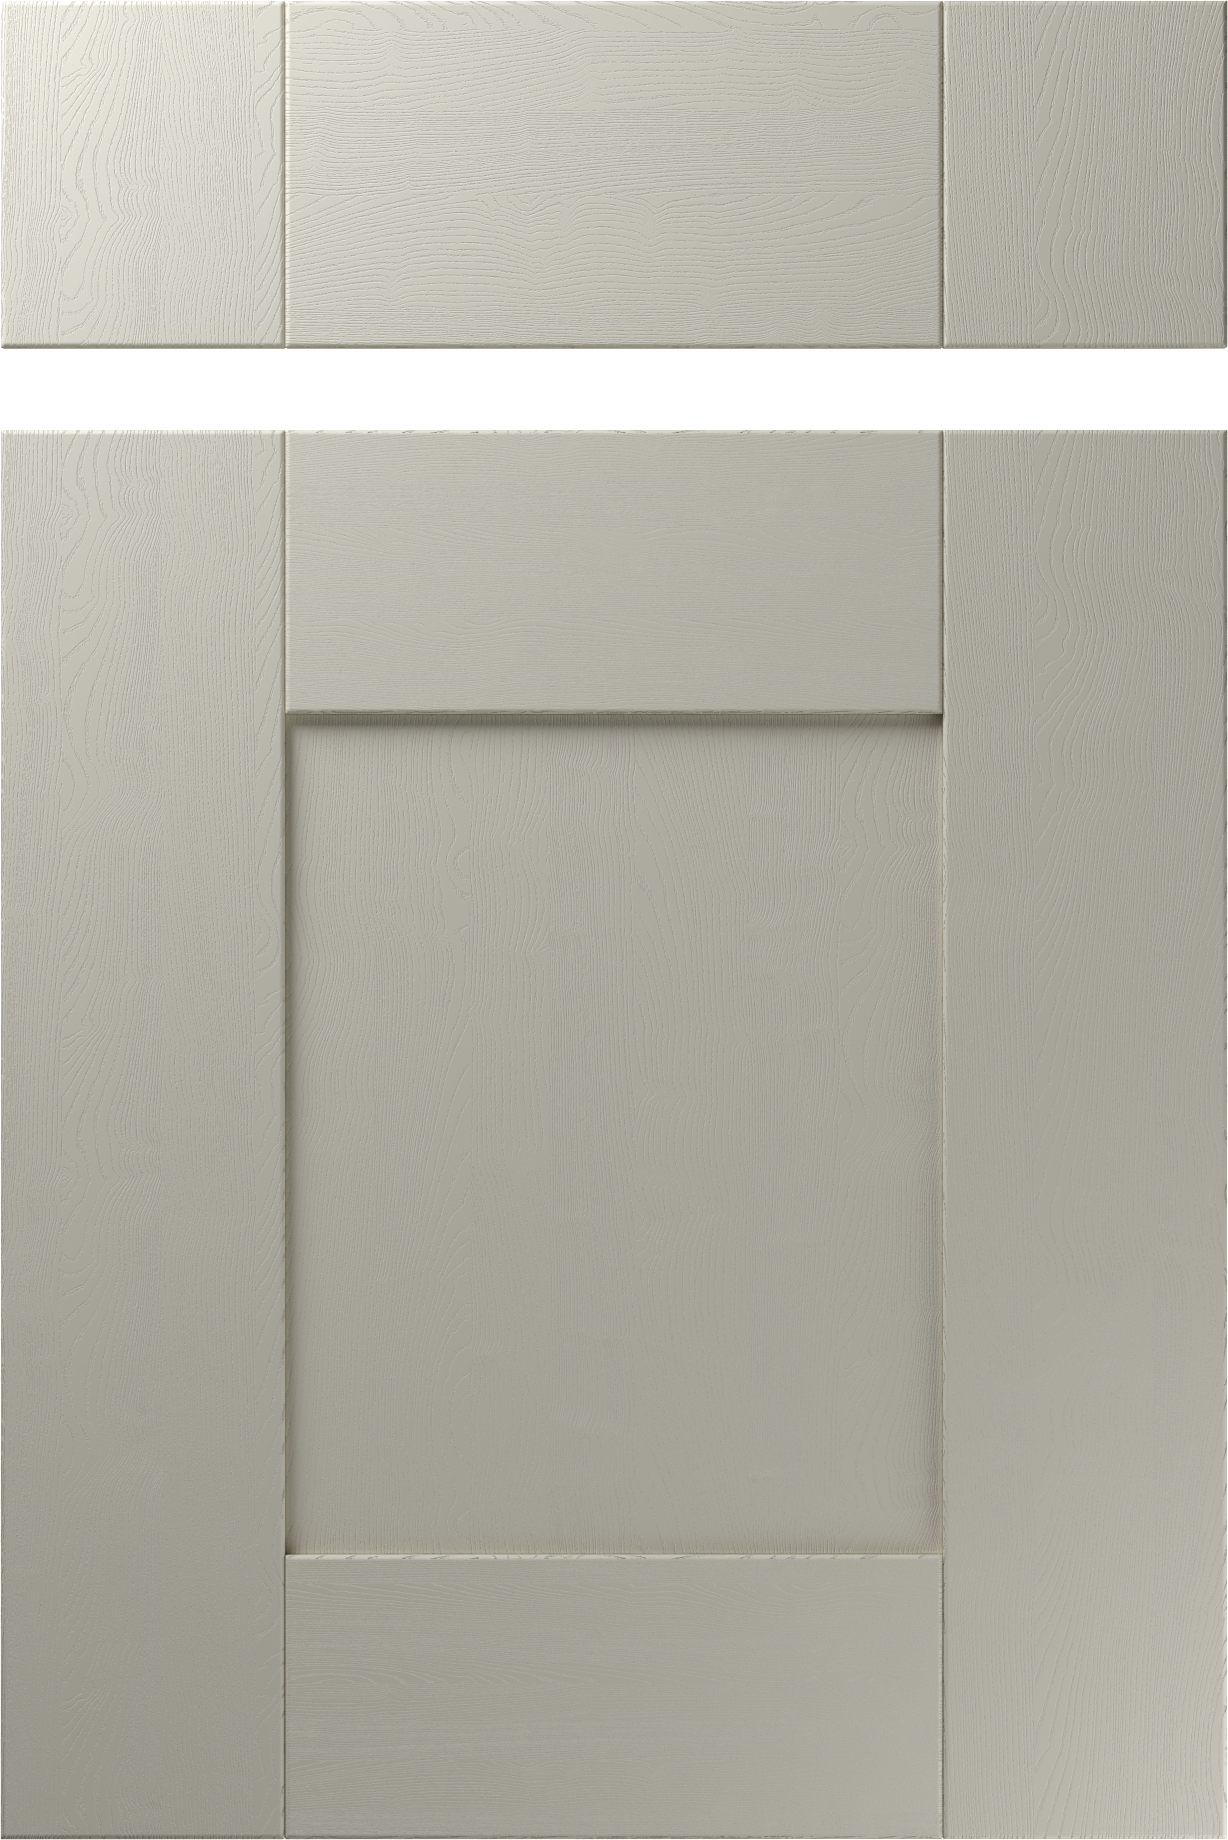 Made to measure shaker doors in grained paint effect